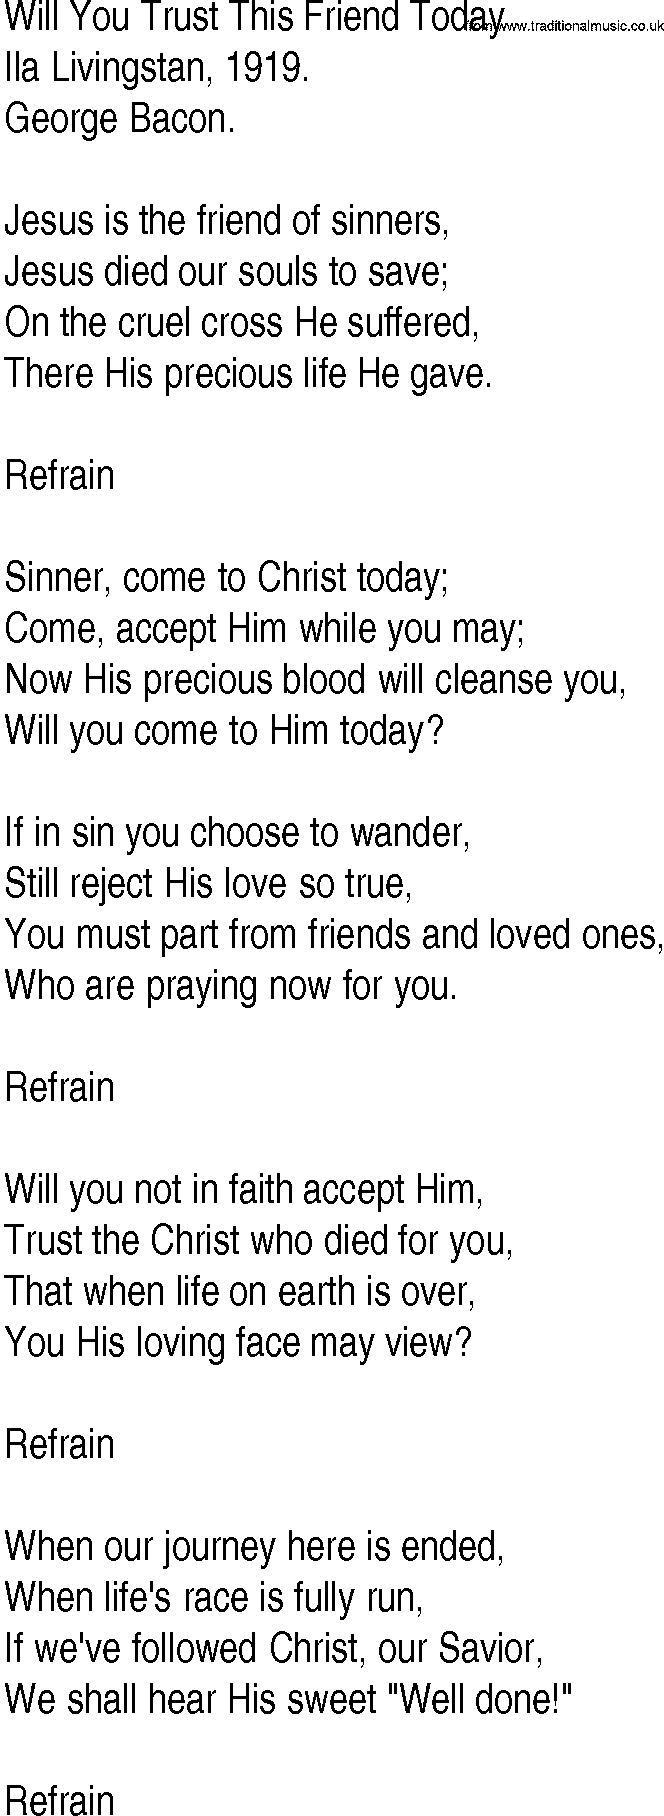 Hymn and Gospel Song: Will You Trust This Friend Today by Ila Livingstan lyrics